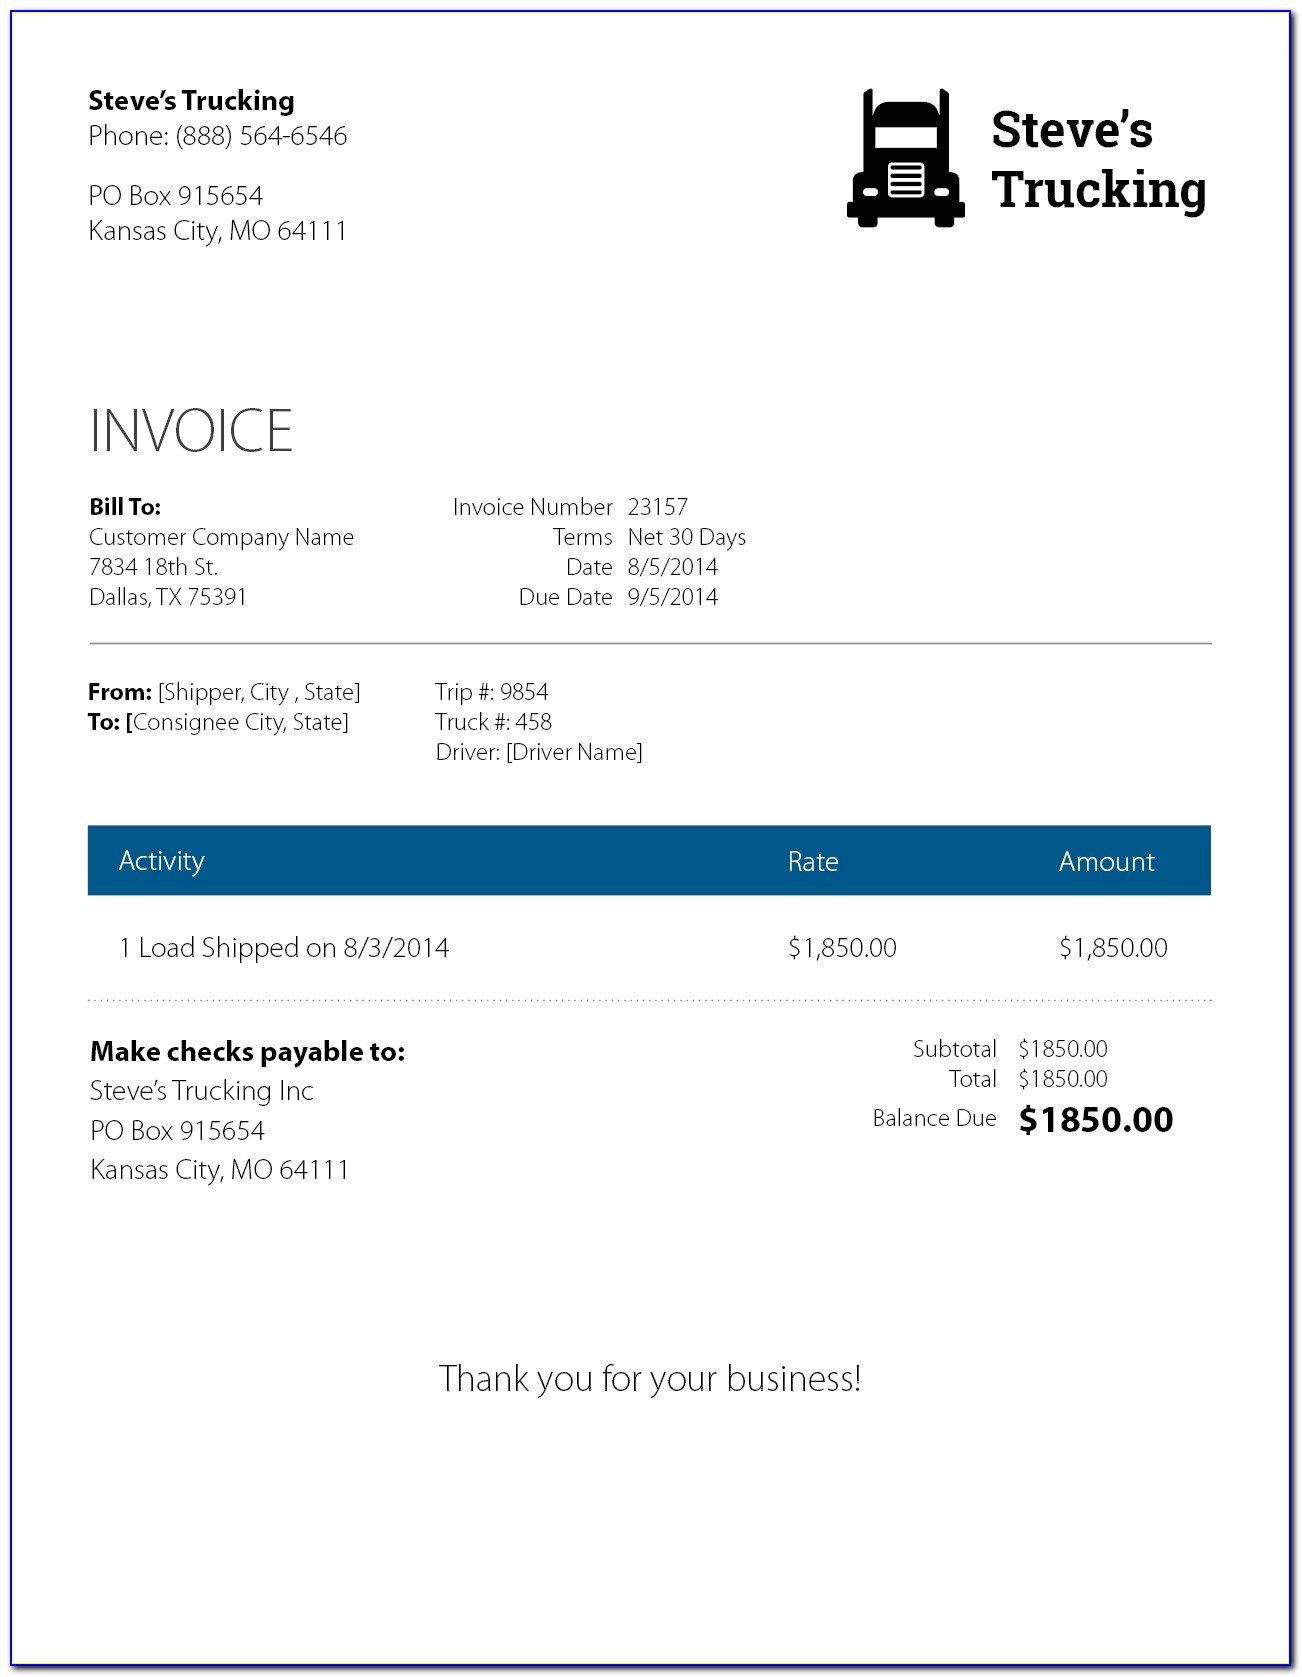 Trucking Invoice Template Eight Keys To A Rock Solid Trucking Invoice Rts Financial 1275 X 1650